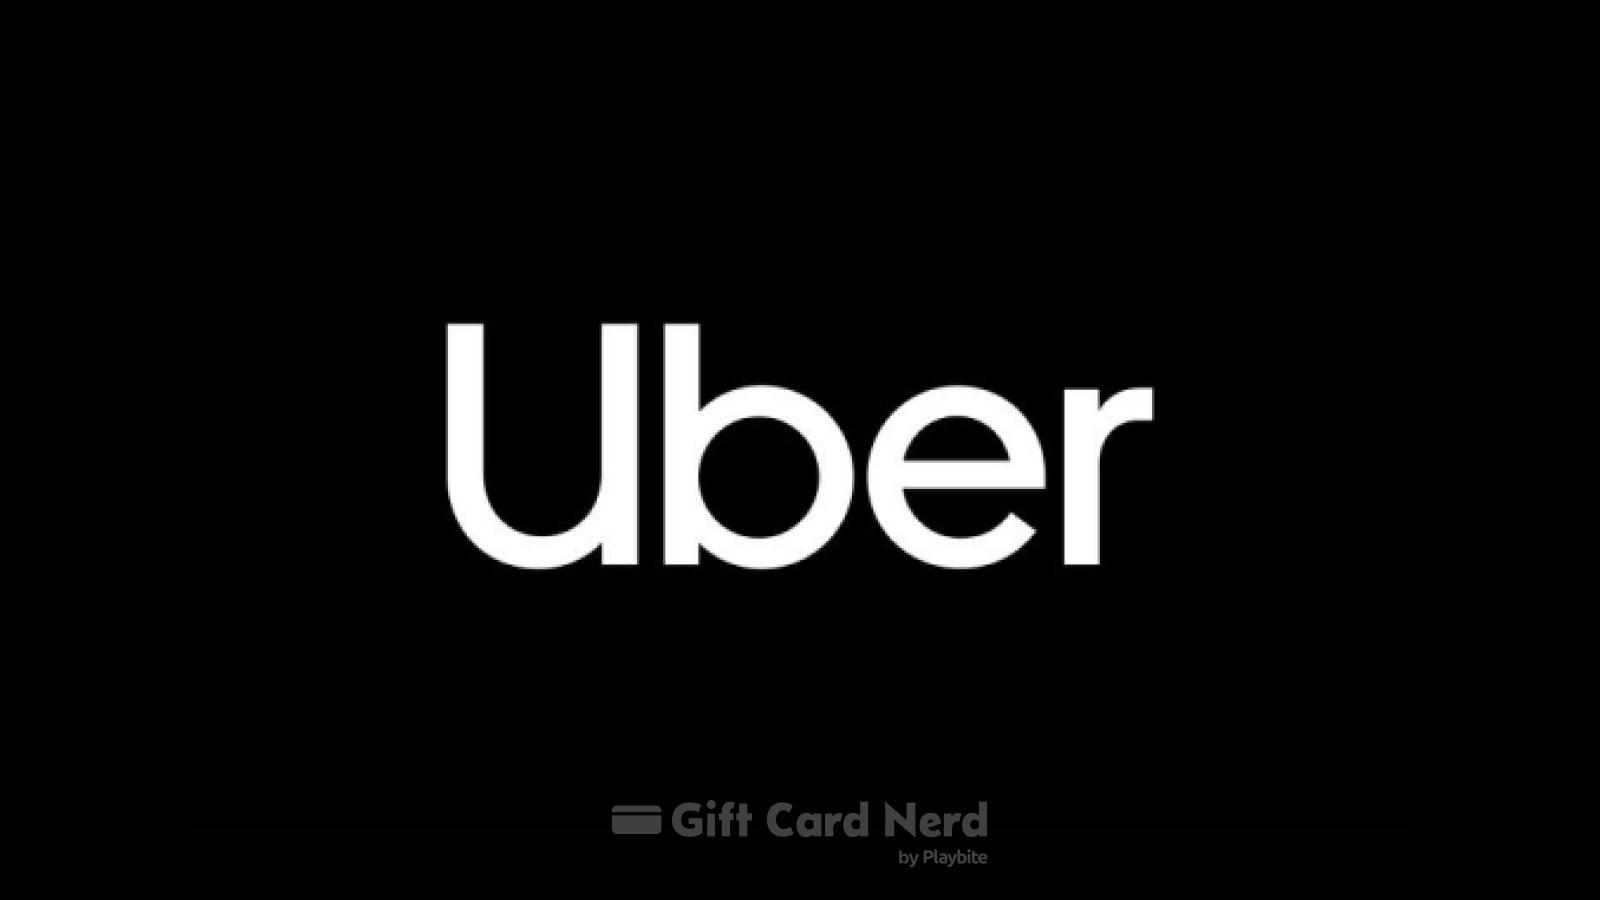 How to Check Your Uber Gift Card Balance